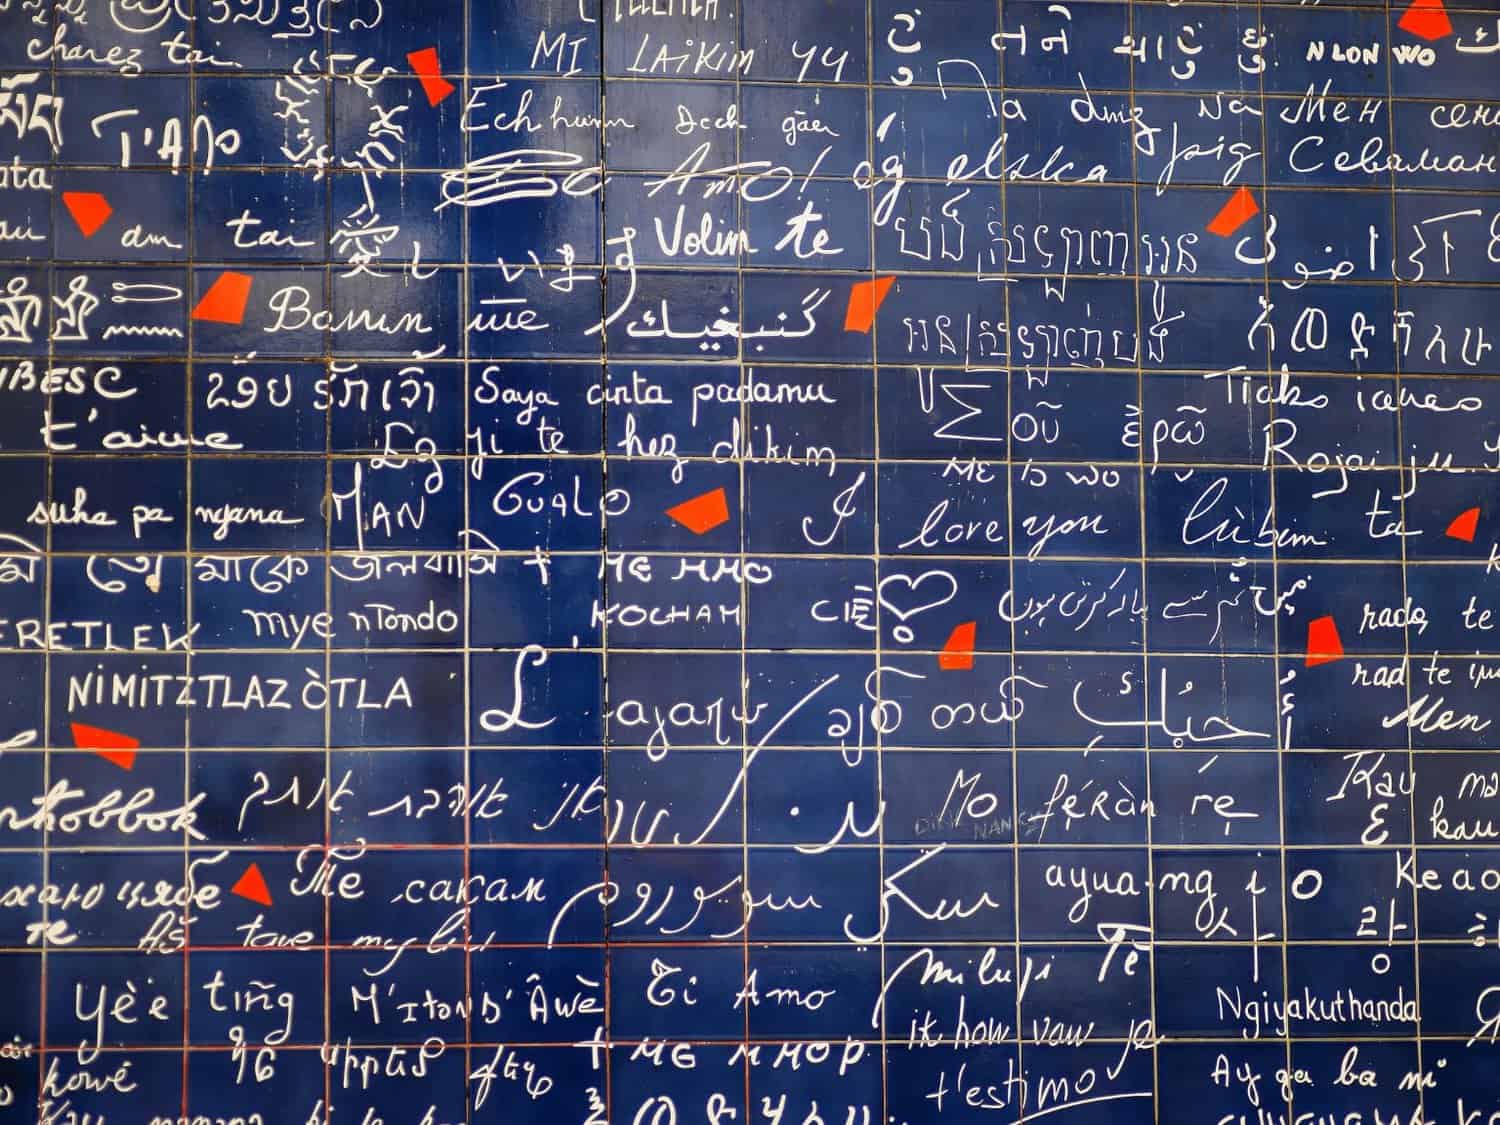 View of the Wall of Love in Paris showing various 'I love you' scripts.